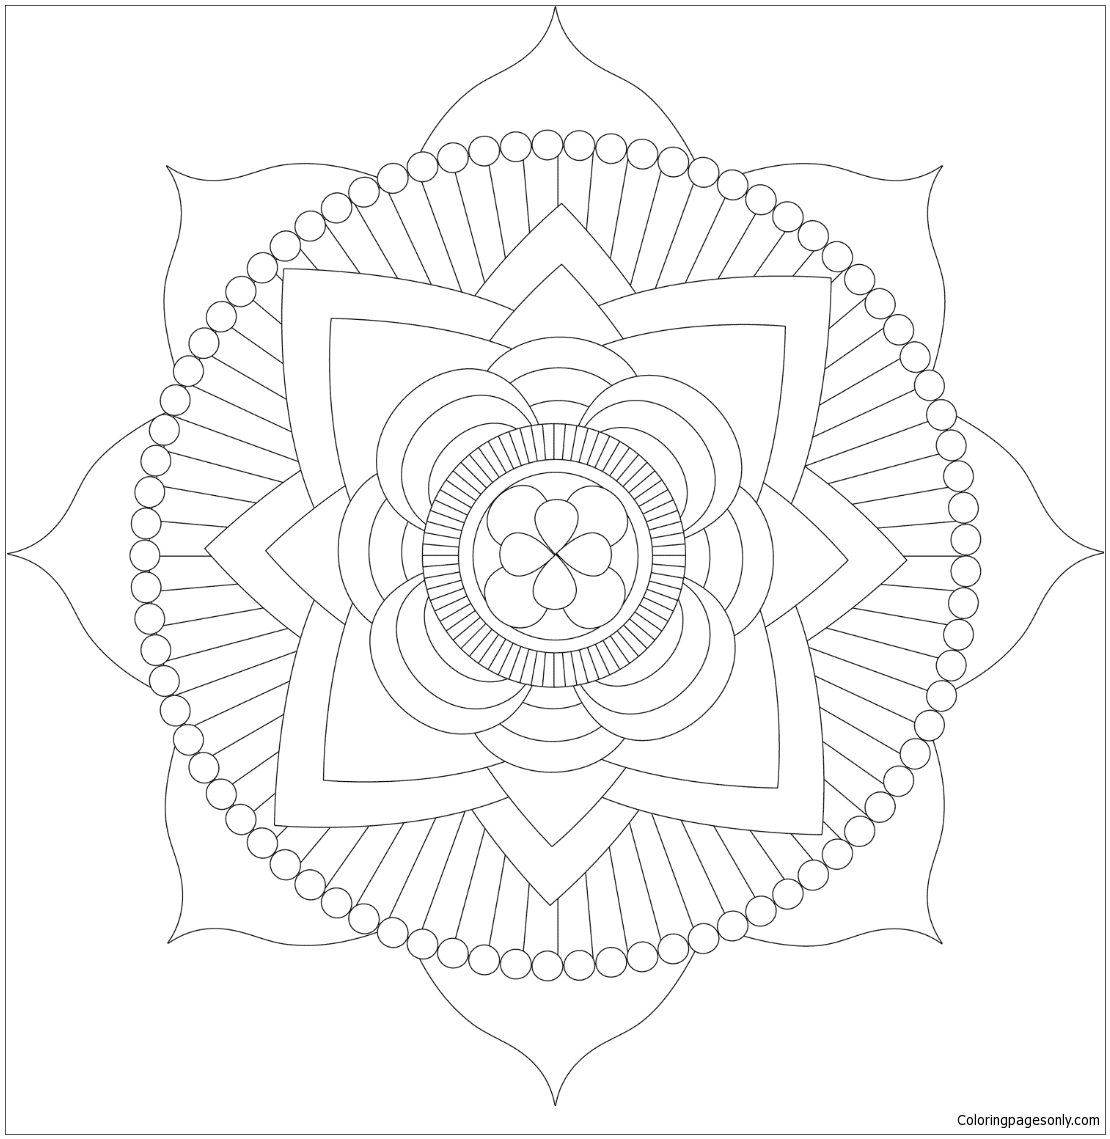 Lotus Mandala By Michelle Grewe Coloring Pages